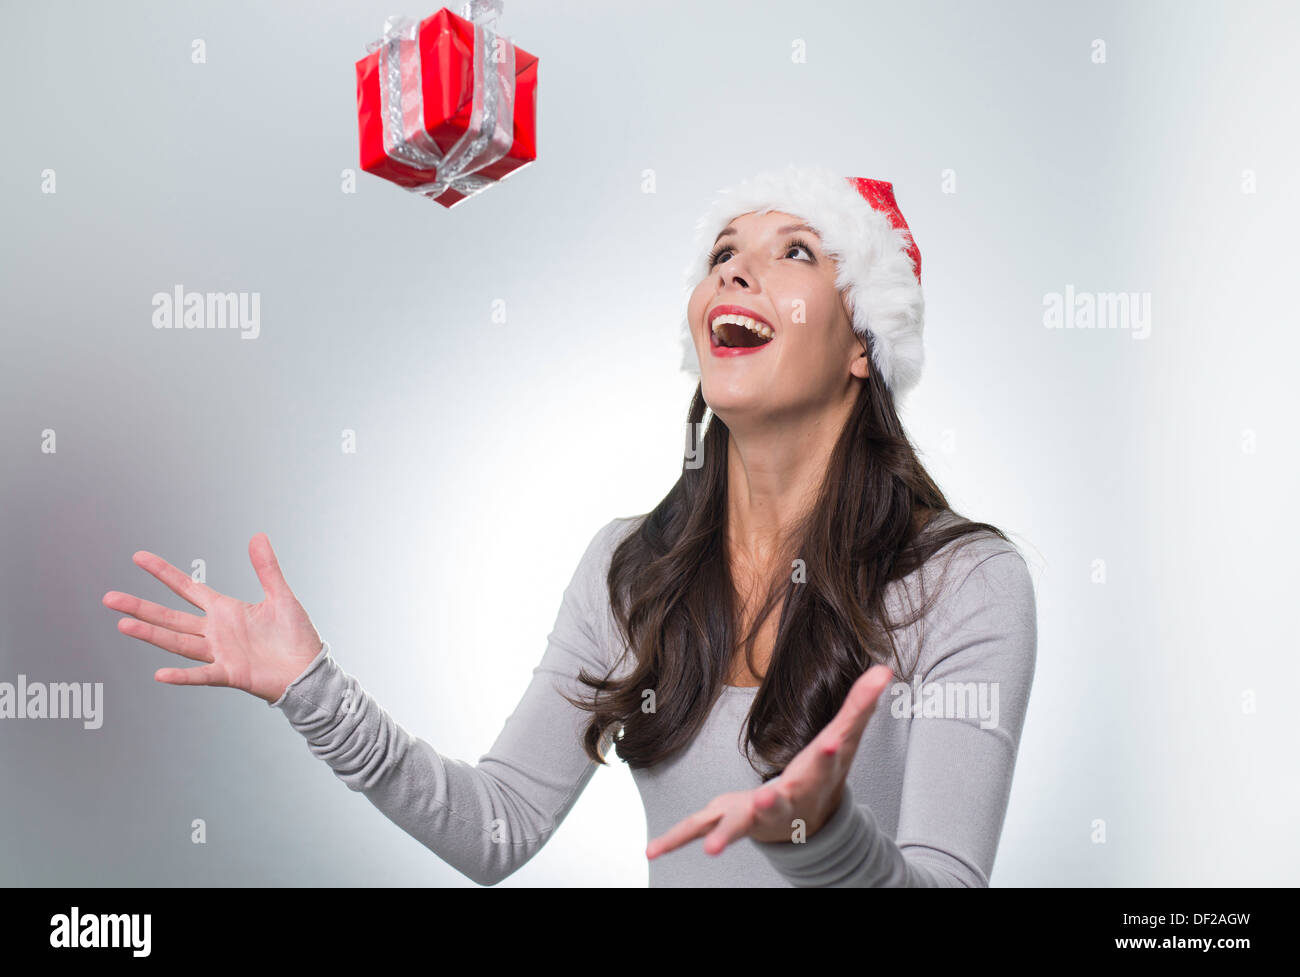 Laughing beautiful woman wearing a red Santa hat catching a surprise Christmas gift suspended midair above her outstretched hand Stock Photo